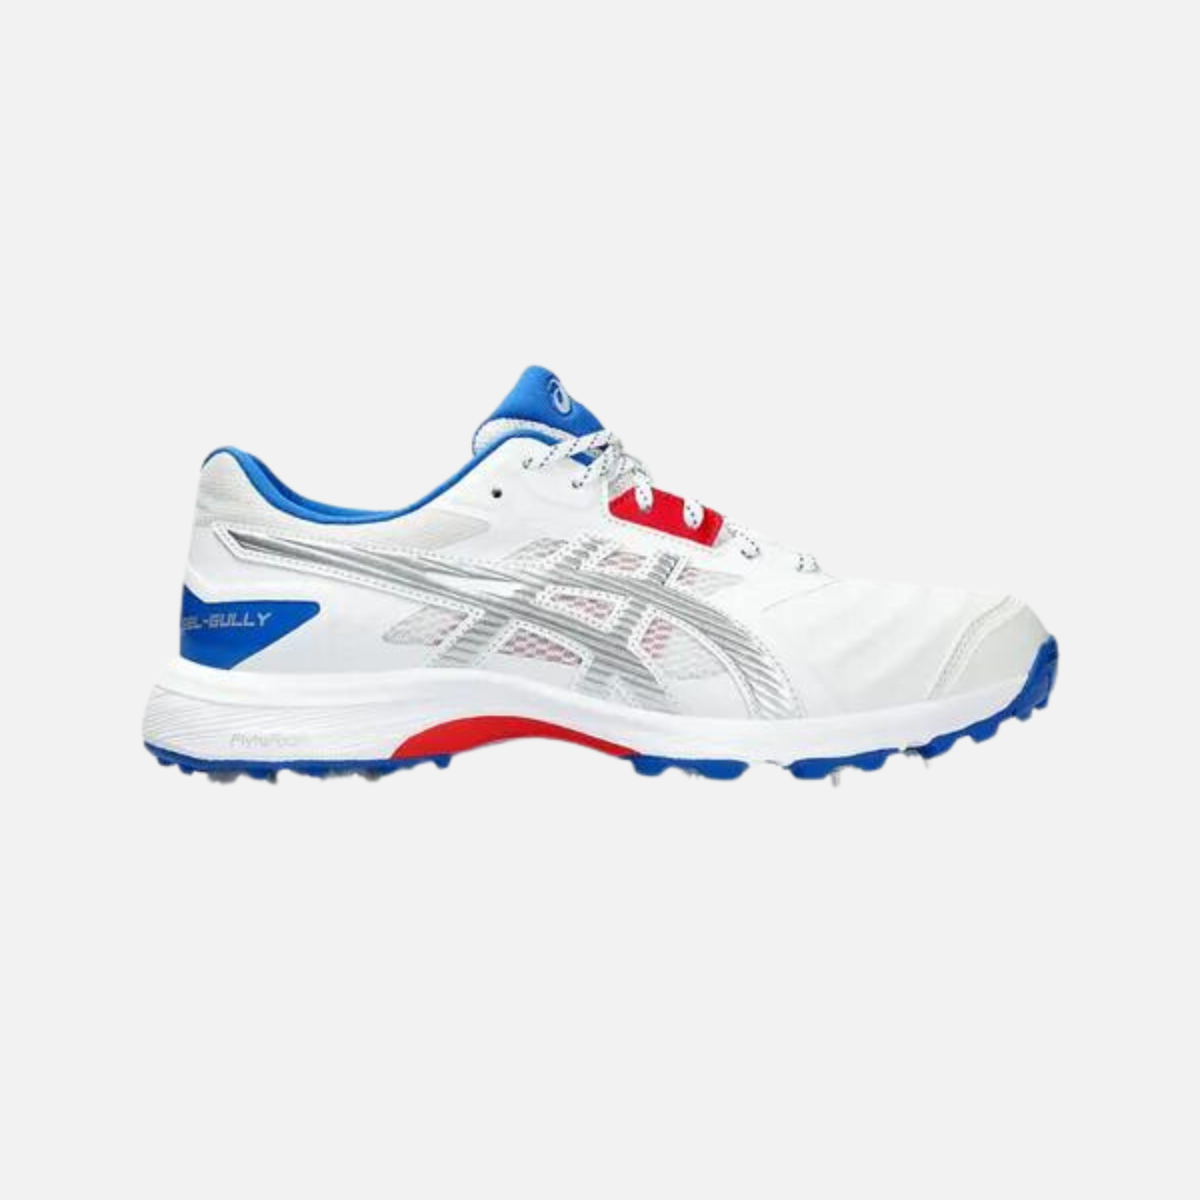 Asics Gel-Gully 7 Men's Cricket Shoes -White/Pure Silver